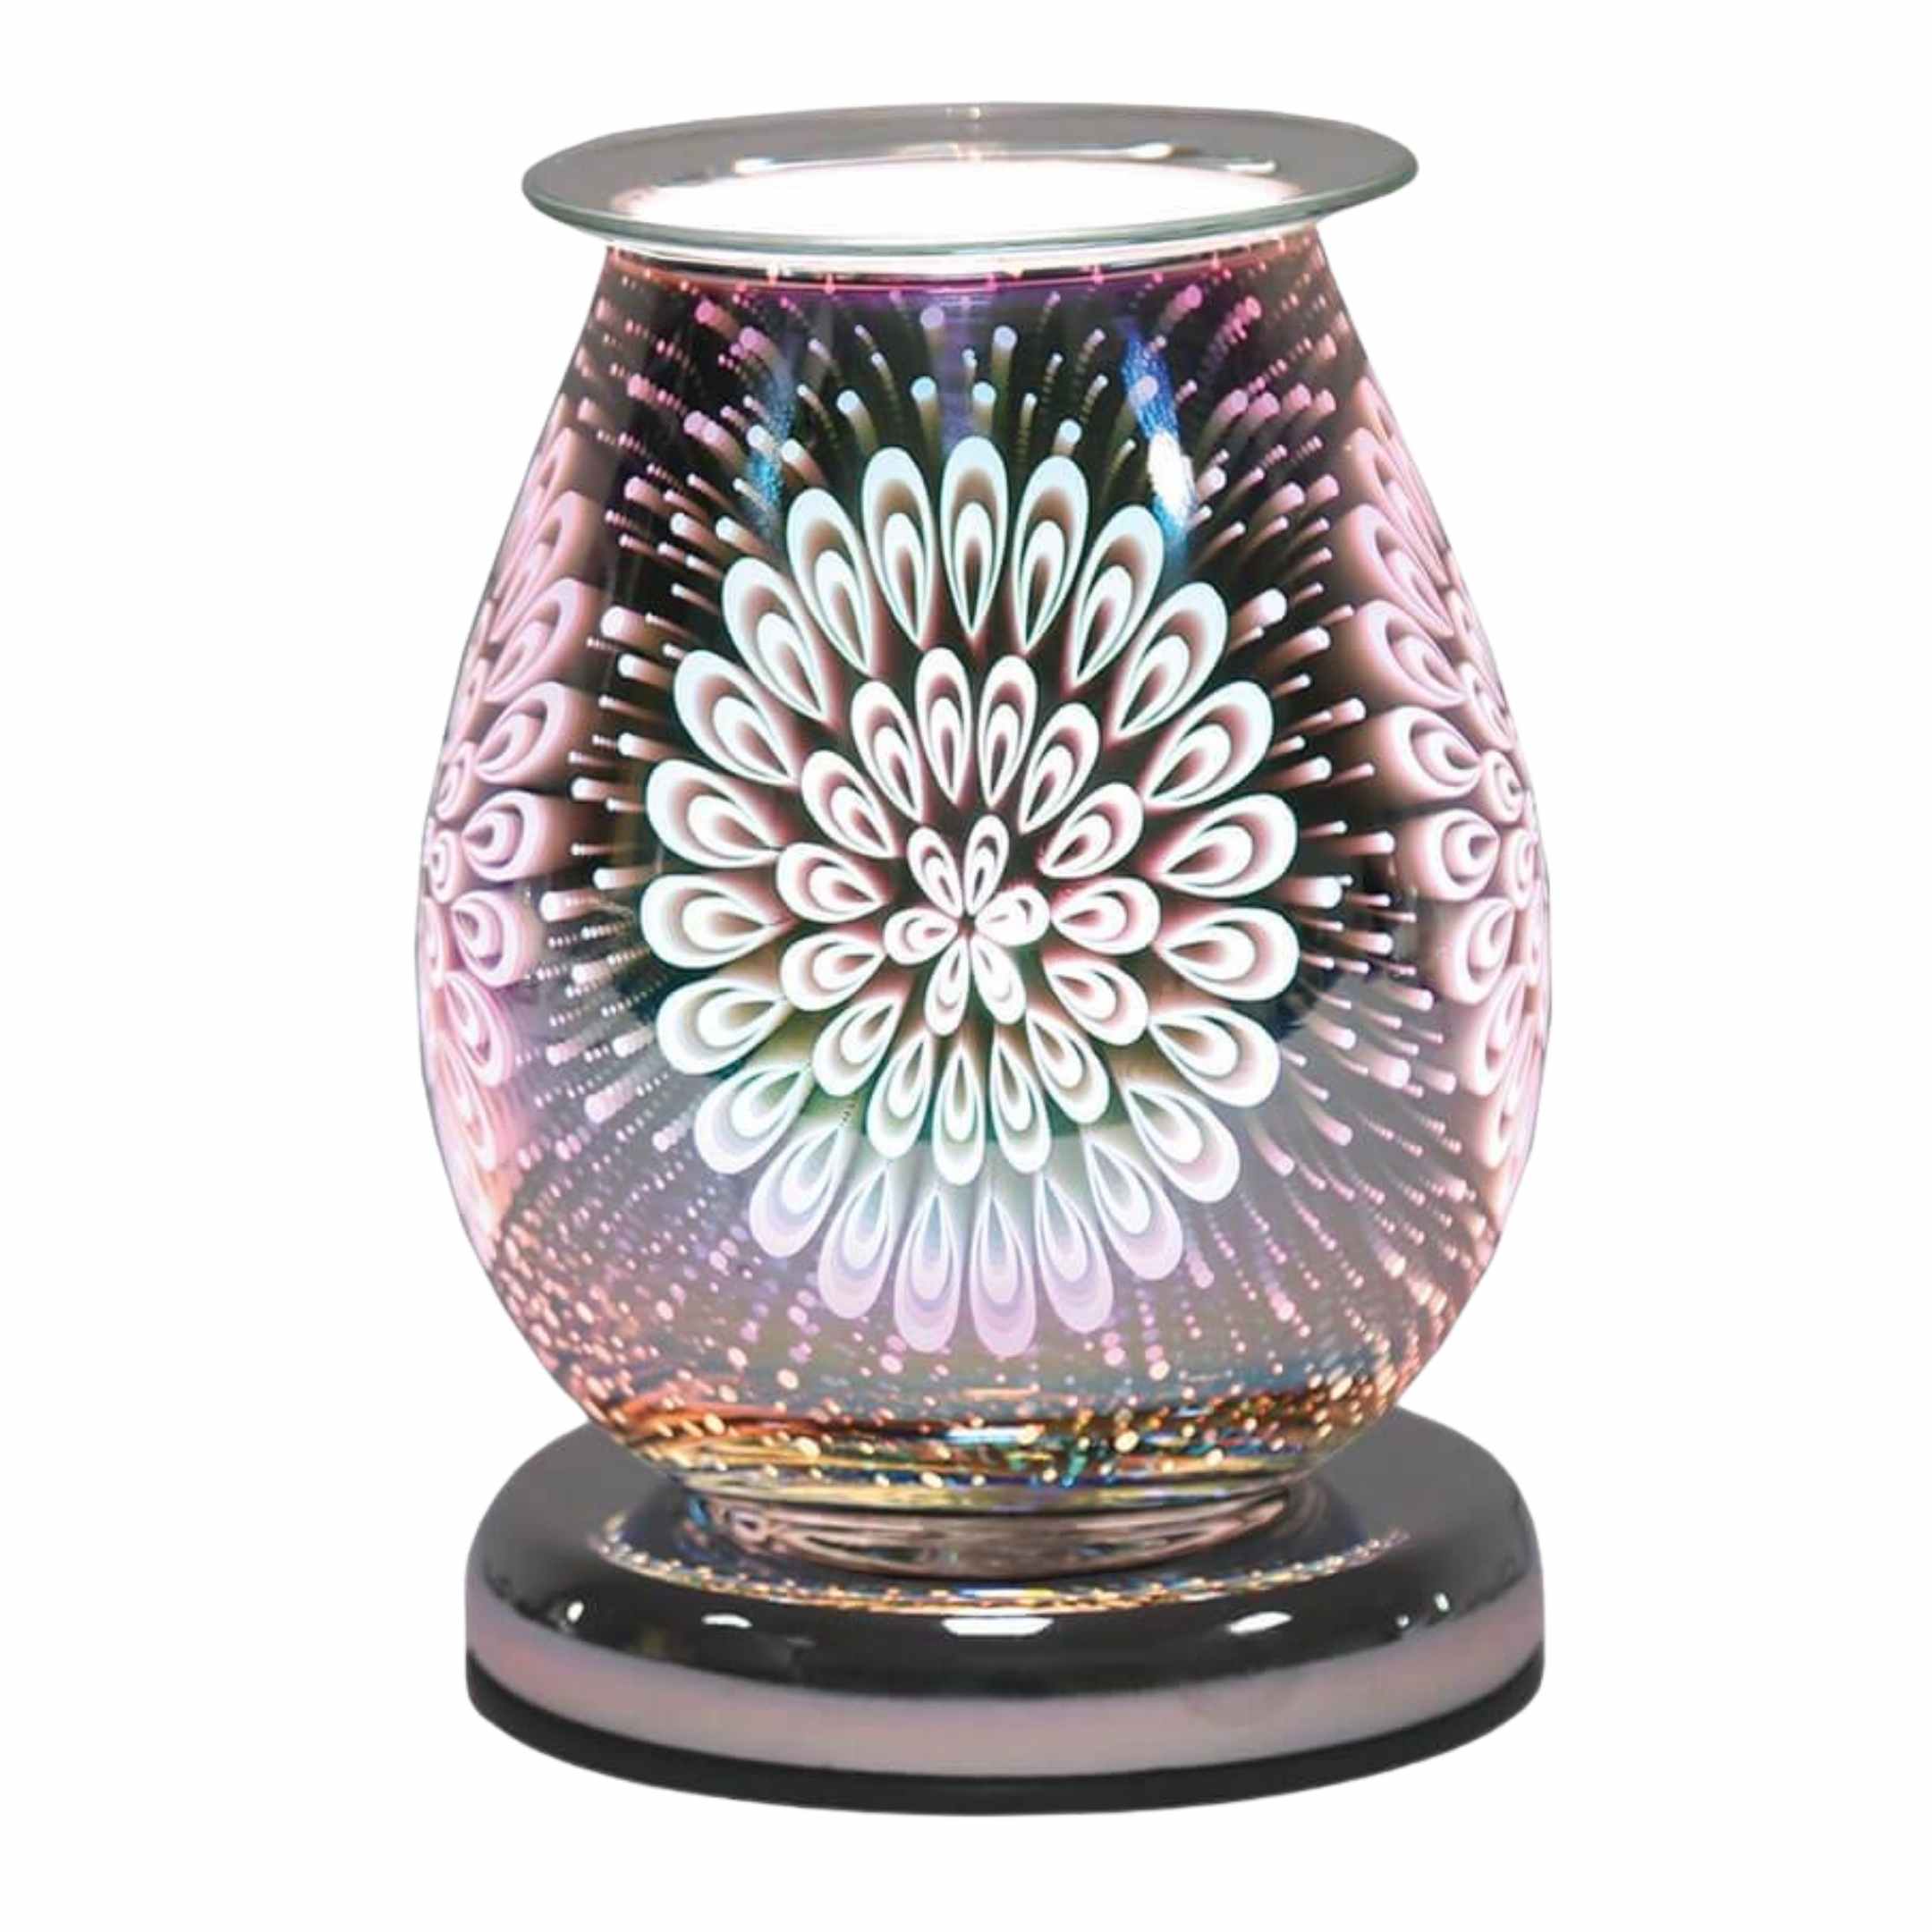 Aroma Accessories Lamp Wax Melt Burners - Peacock Oval